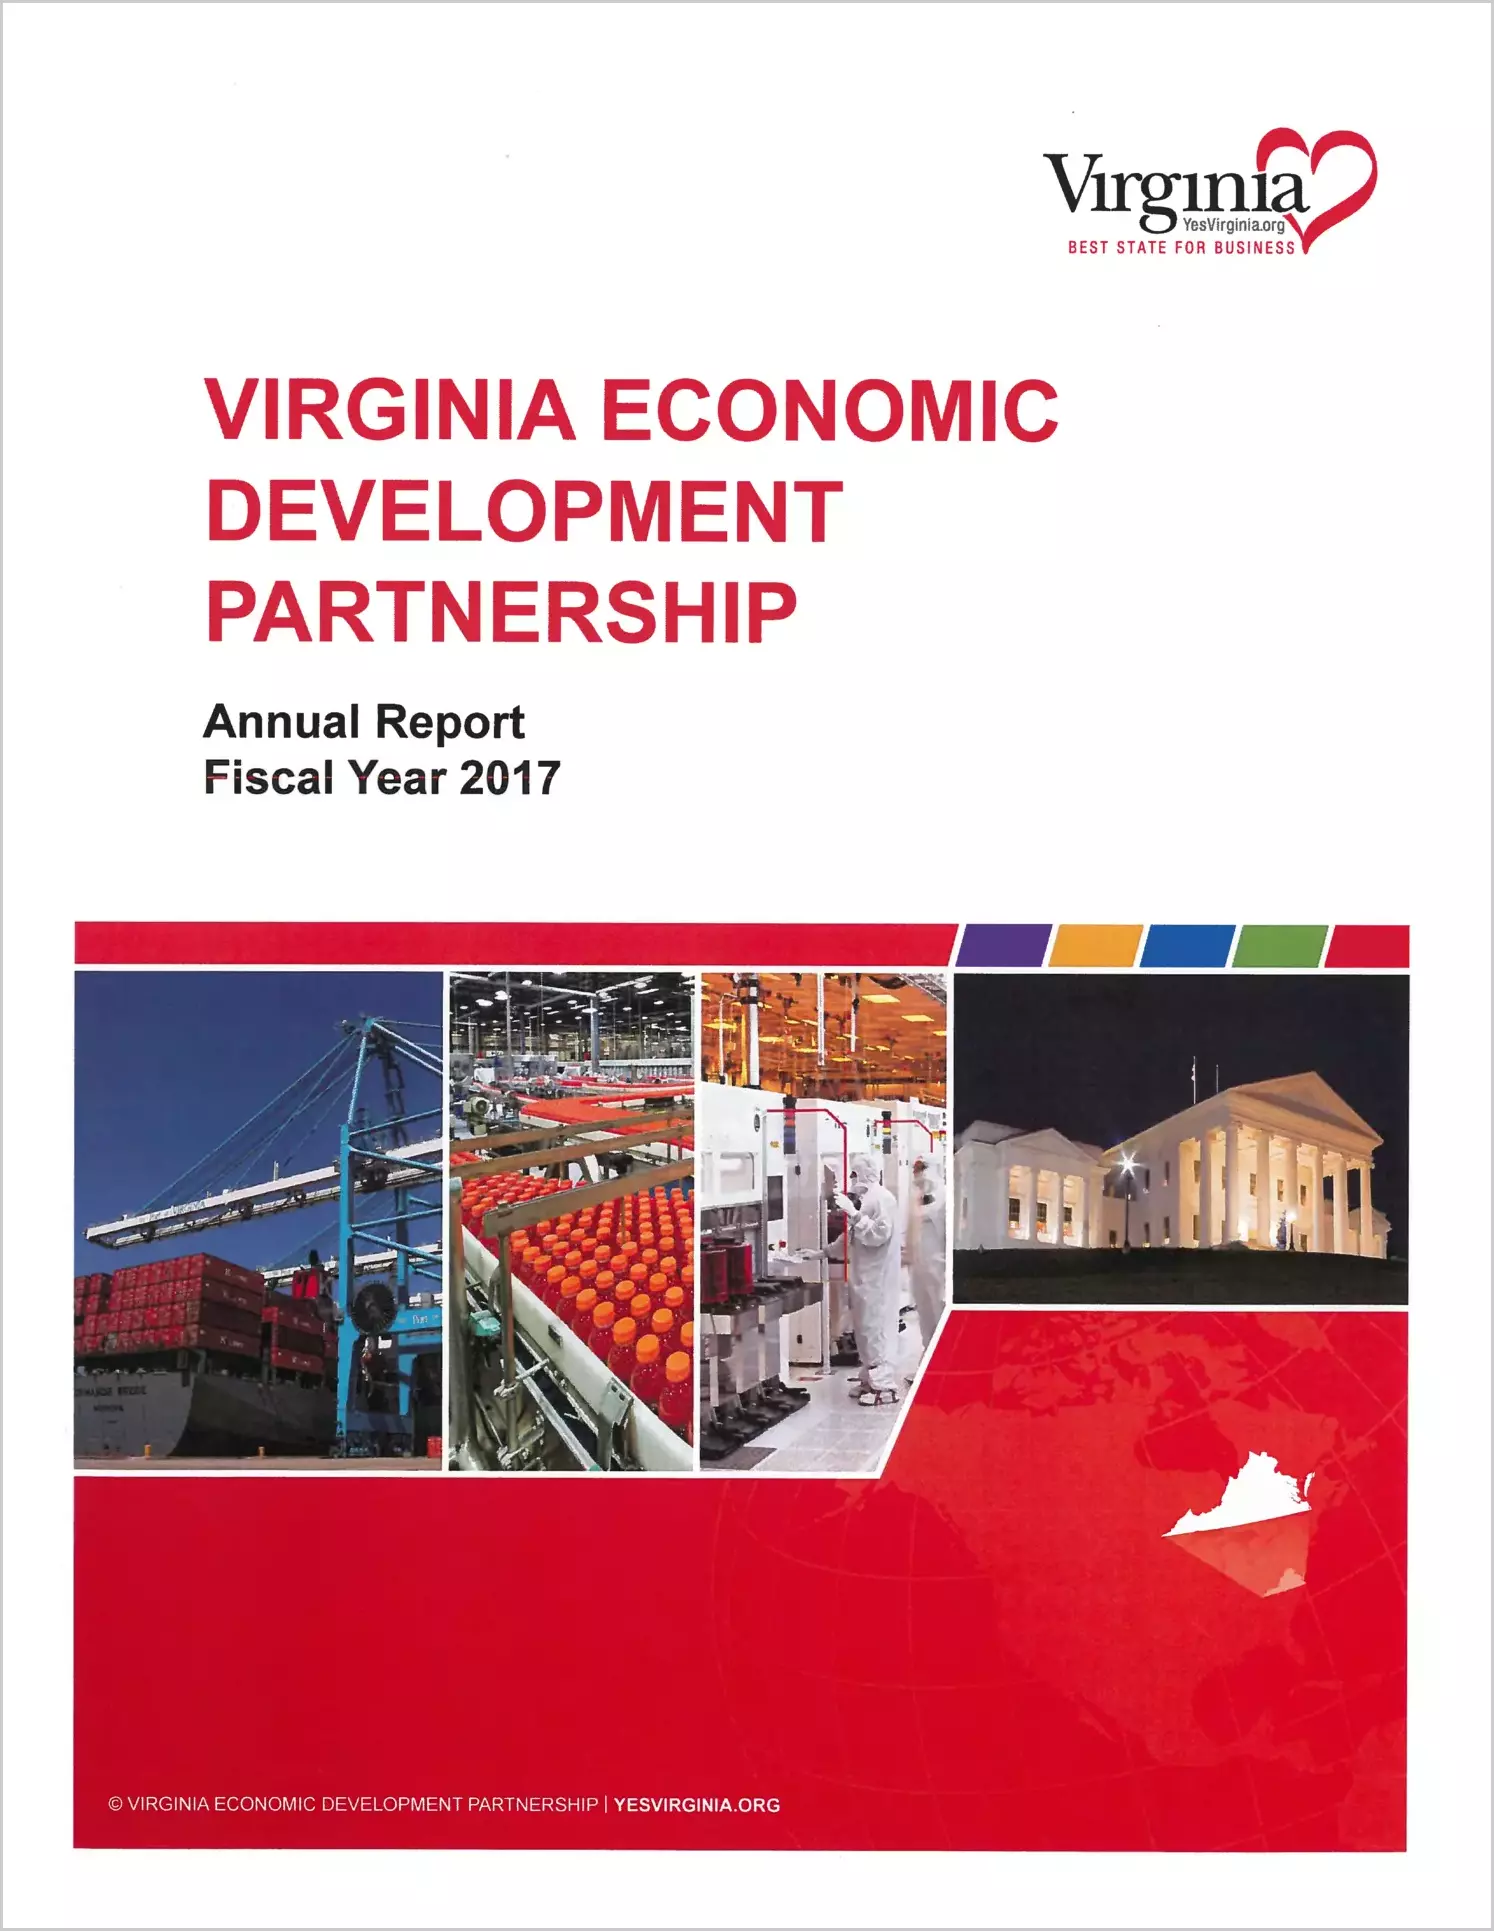 Virginia Economic Development Partnership Financial Statements for the year ended June 30, 2017